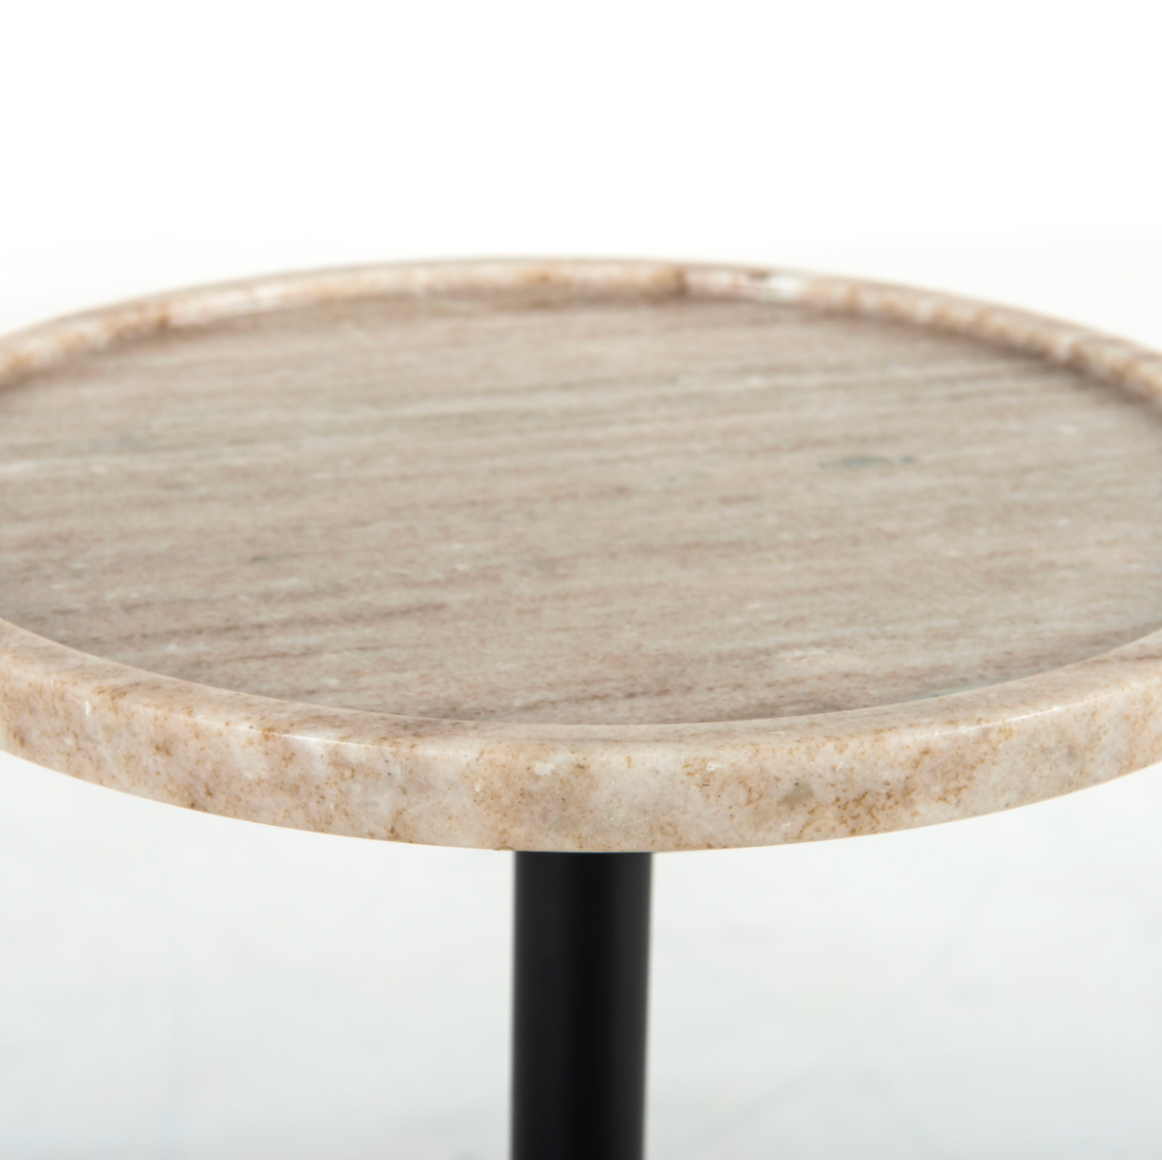 We love the abstract design of this Viola Accent Table - Antique White Marble. Made from solid marble, things brings an elegant feel to any space.   Overall Dimensions: 10.00"w x 10.00"d x 18.75"h  Colors: Antique White Marble, Dark Kettle Black Materials: Solid Marble, Iron